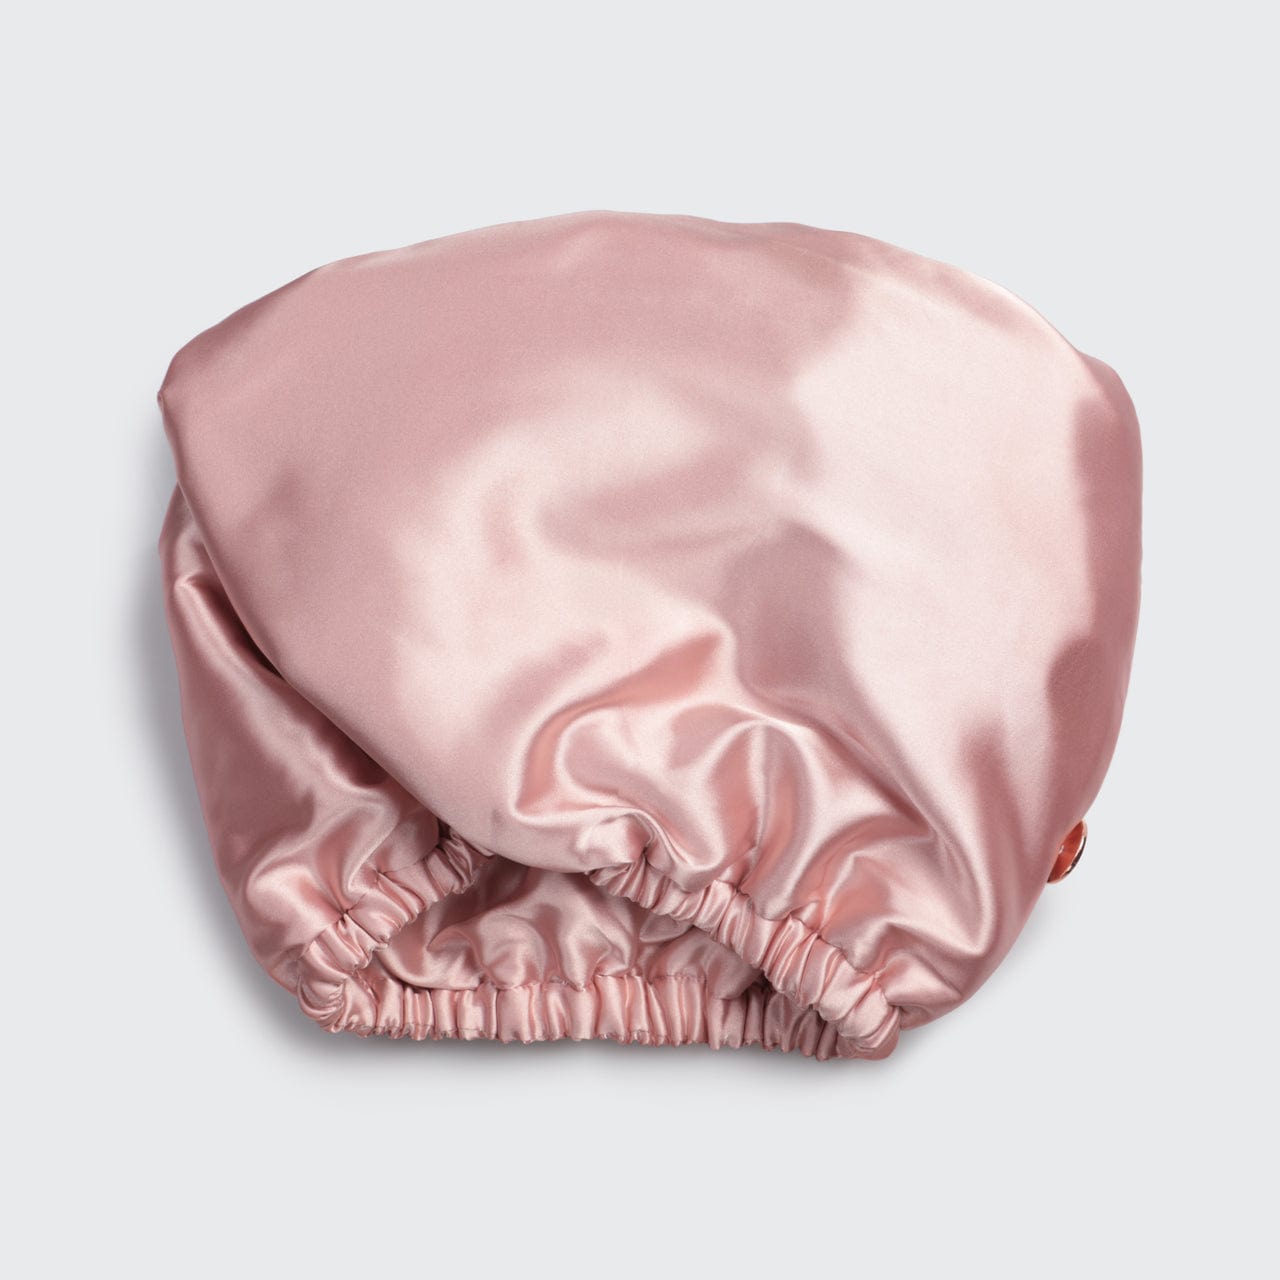 Satin-Wrapped Hair Towel - Blush by KITSCH